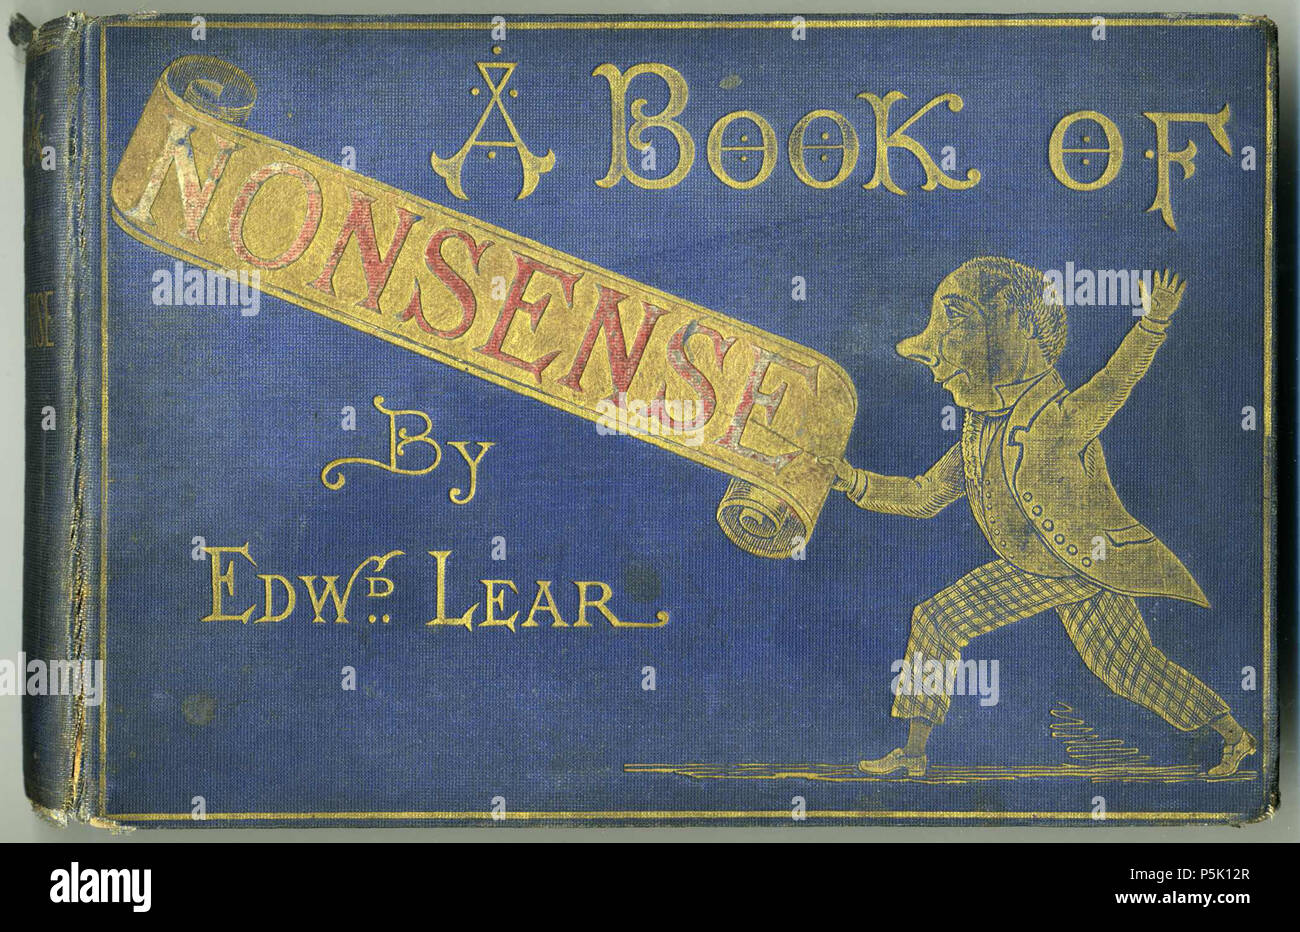 N/A. English: Cover for A Book of Nonsense by Edward Lear (ca 1875 James  Miller edition) Français : Couverture de A Book of Nonsense d'Edward Lear  (édition James Miller, vers 1875) .